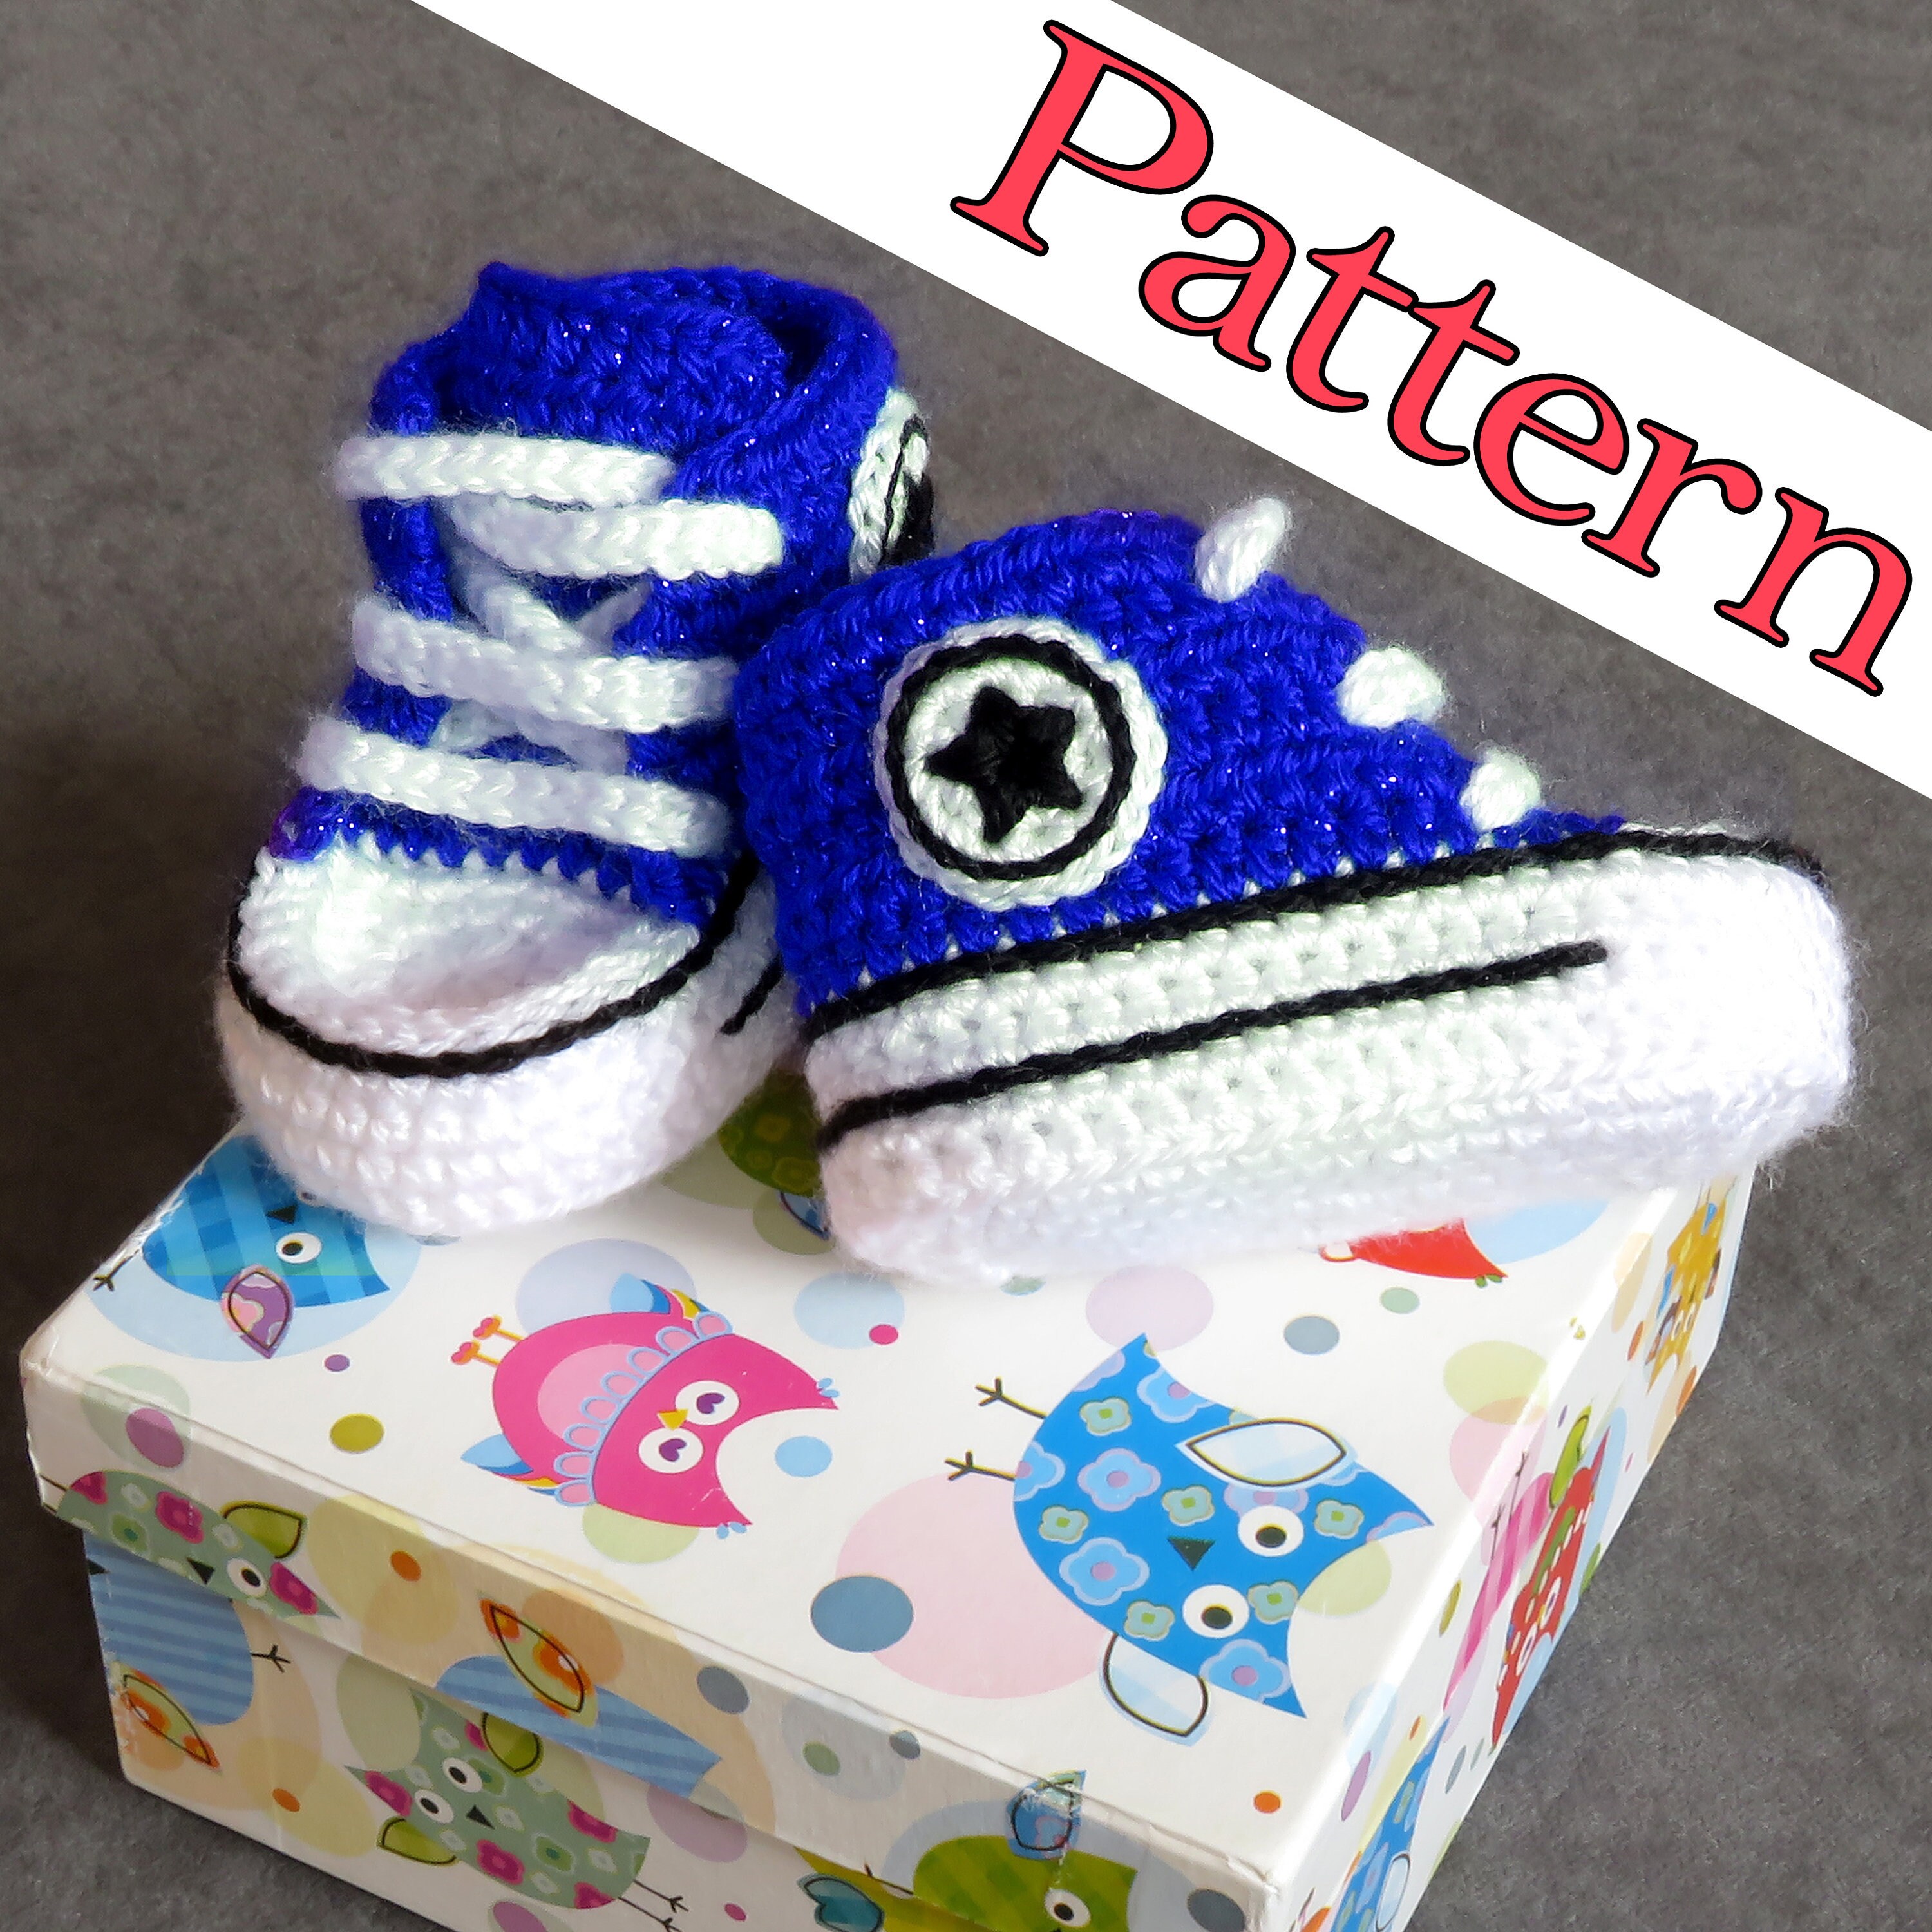 Had gift Scene Converse Shoes Baby Booties Crochet Pattern Crochet Baby | Etsy